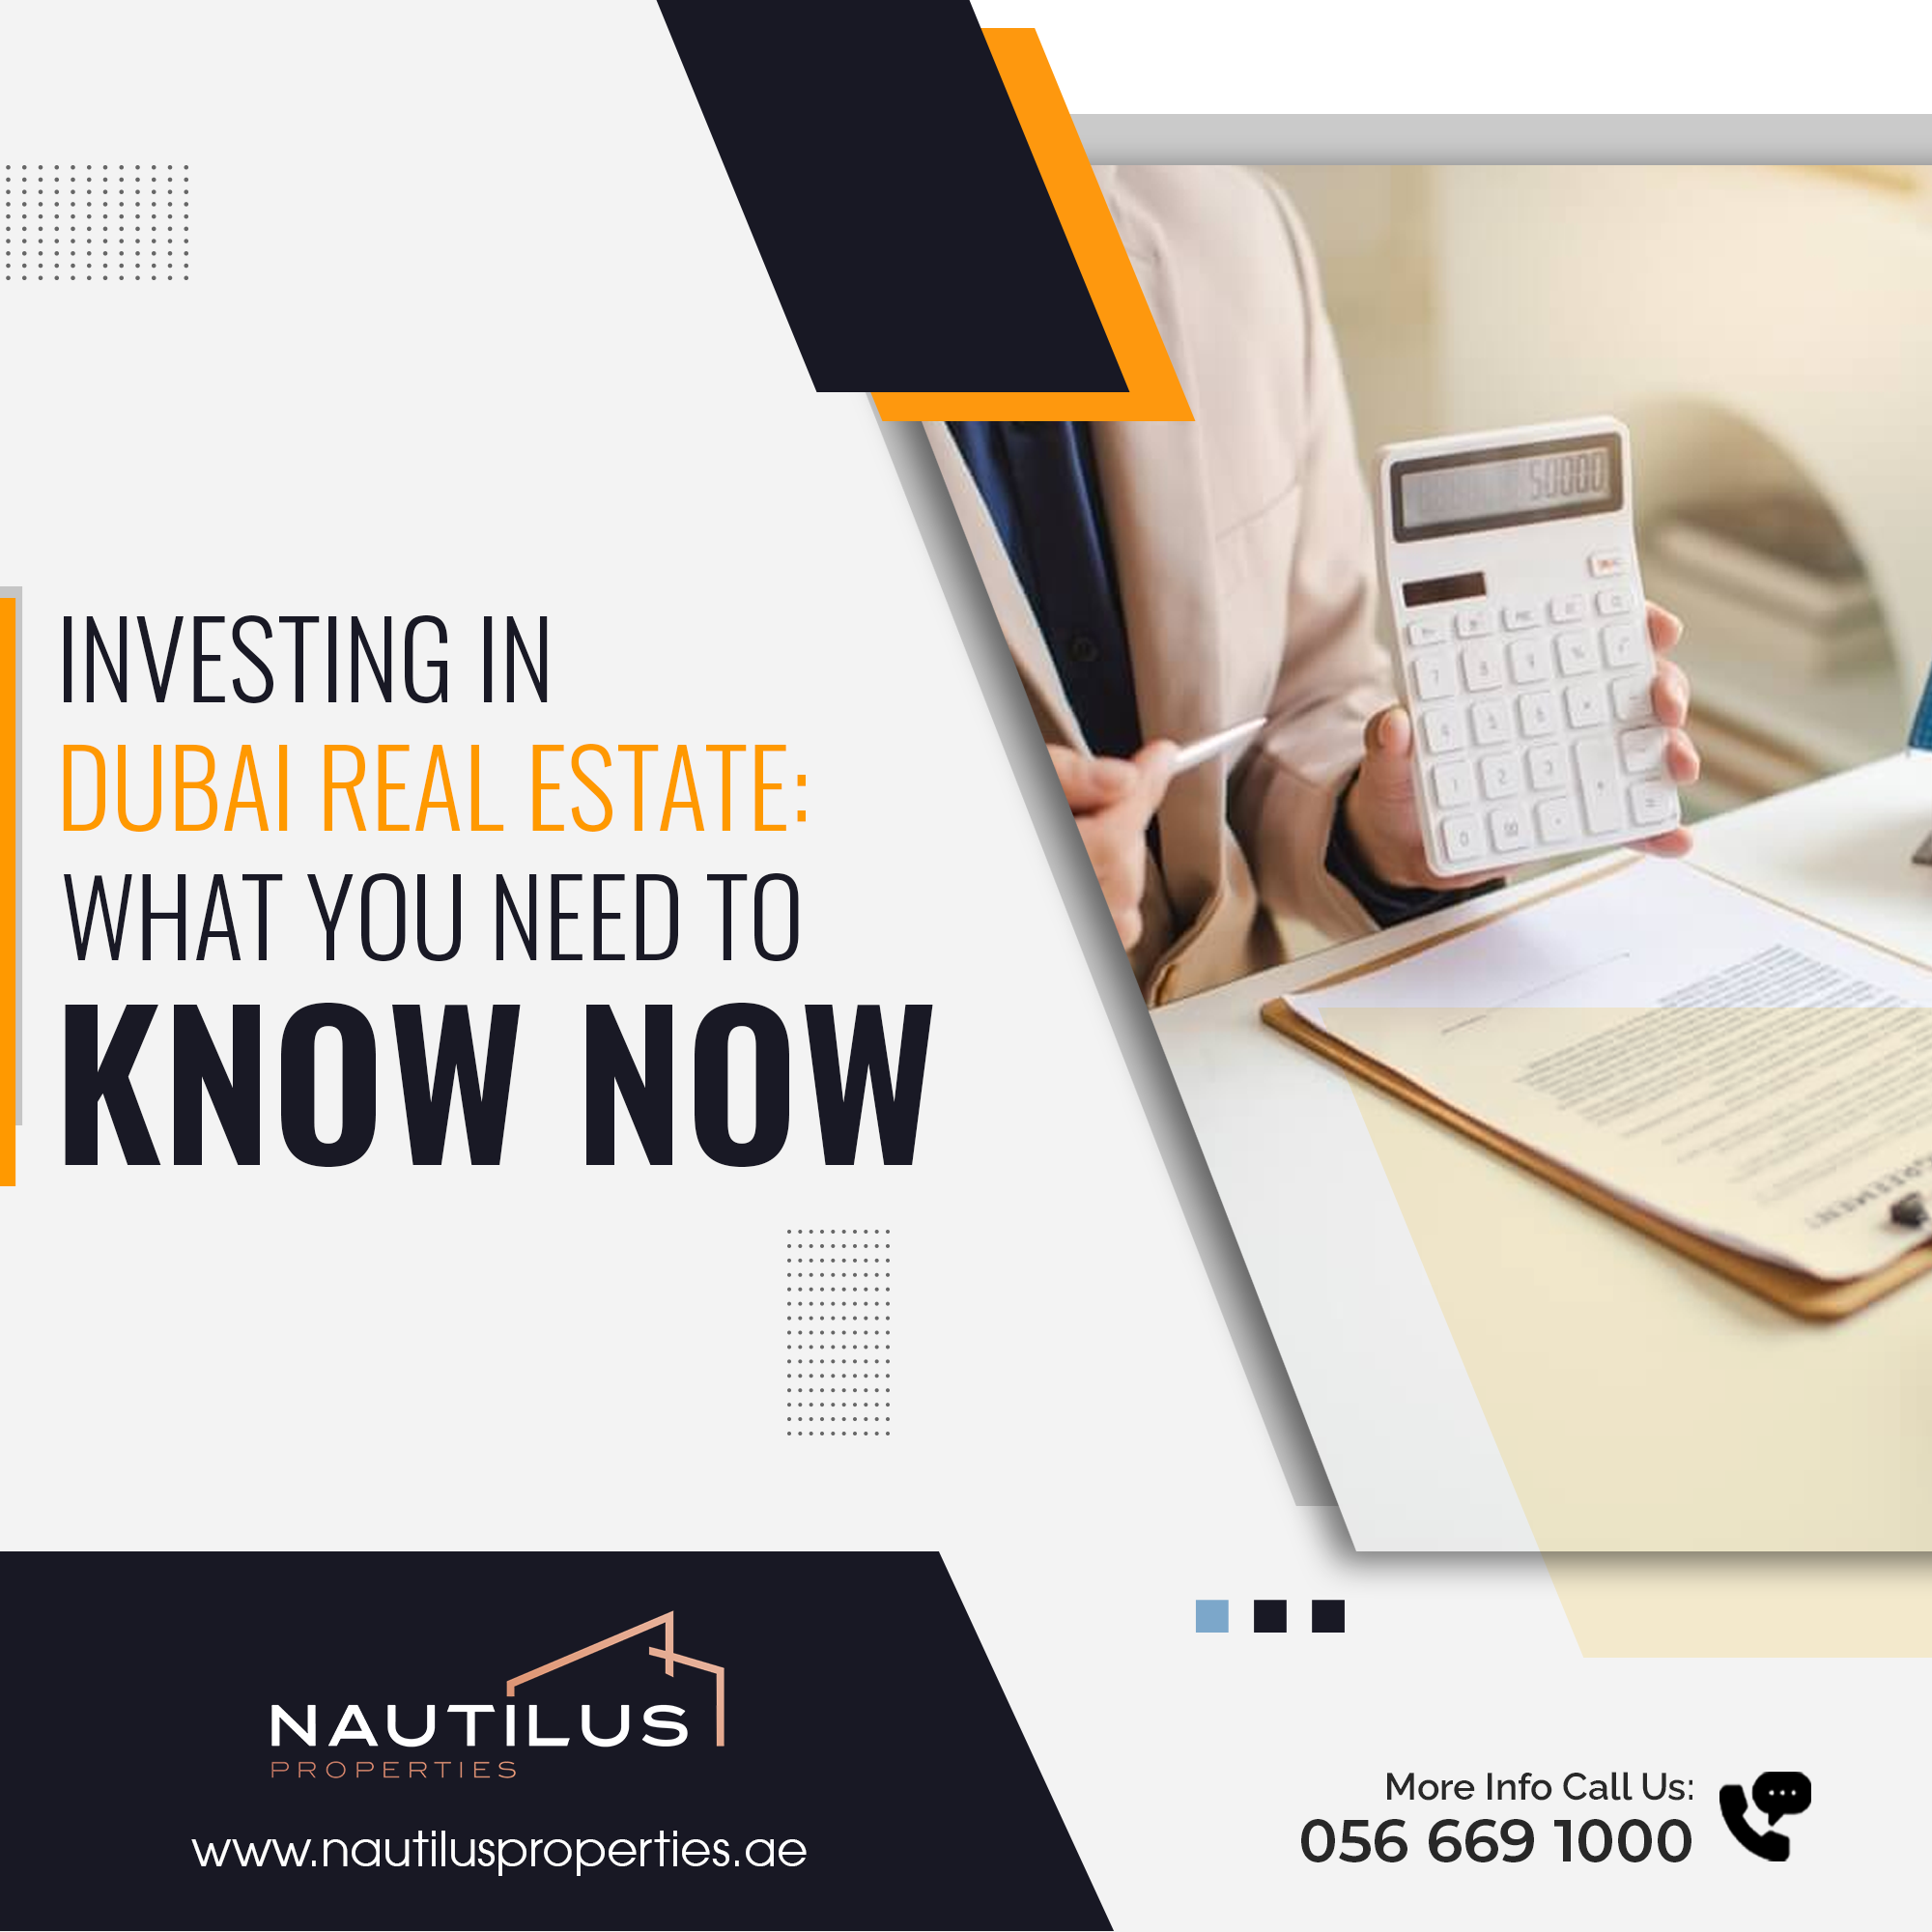 A promotional image for Nautilus Properties discussing investing in Dubai real estate, featuring a person using a calculator and financial documents.